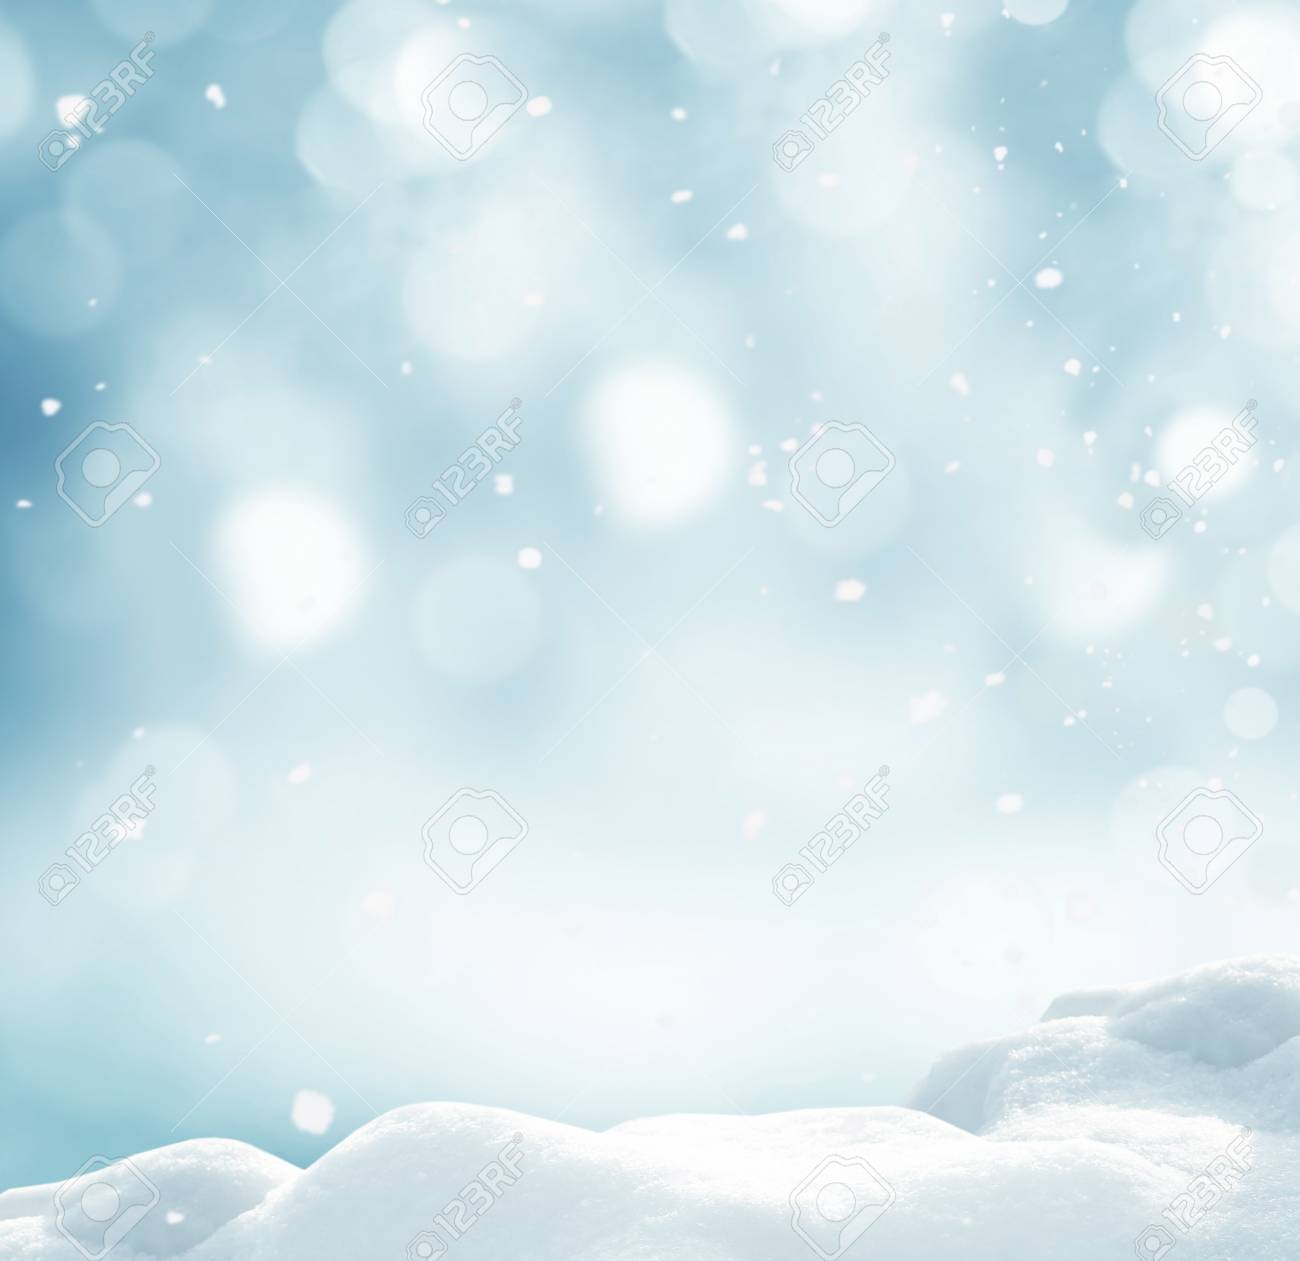 Winter Background With Snow And Blurred Bokeh Merry Christmas